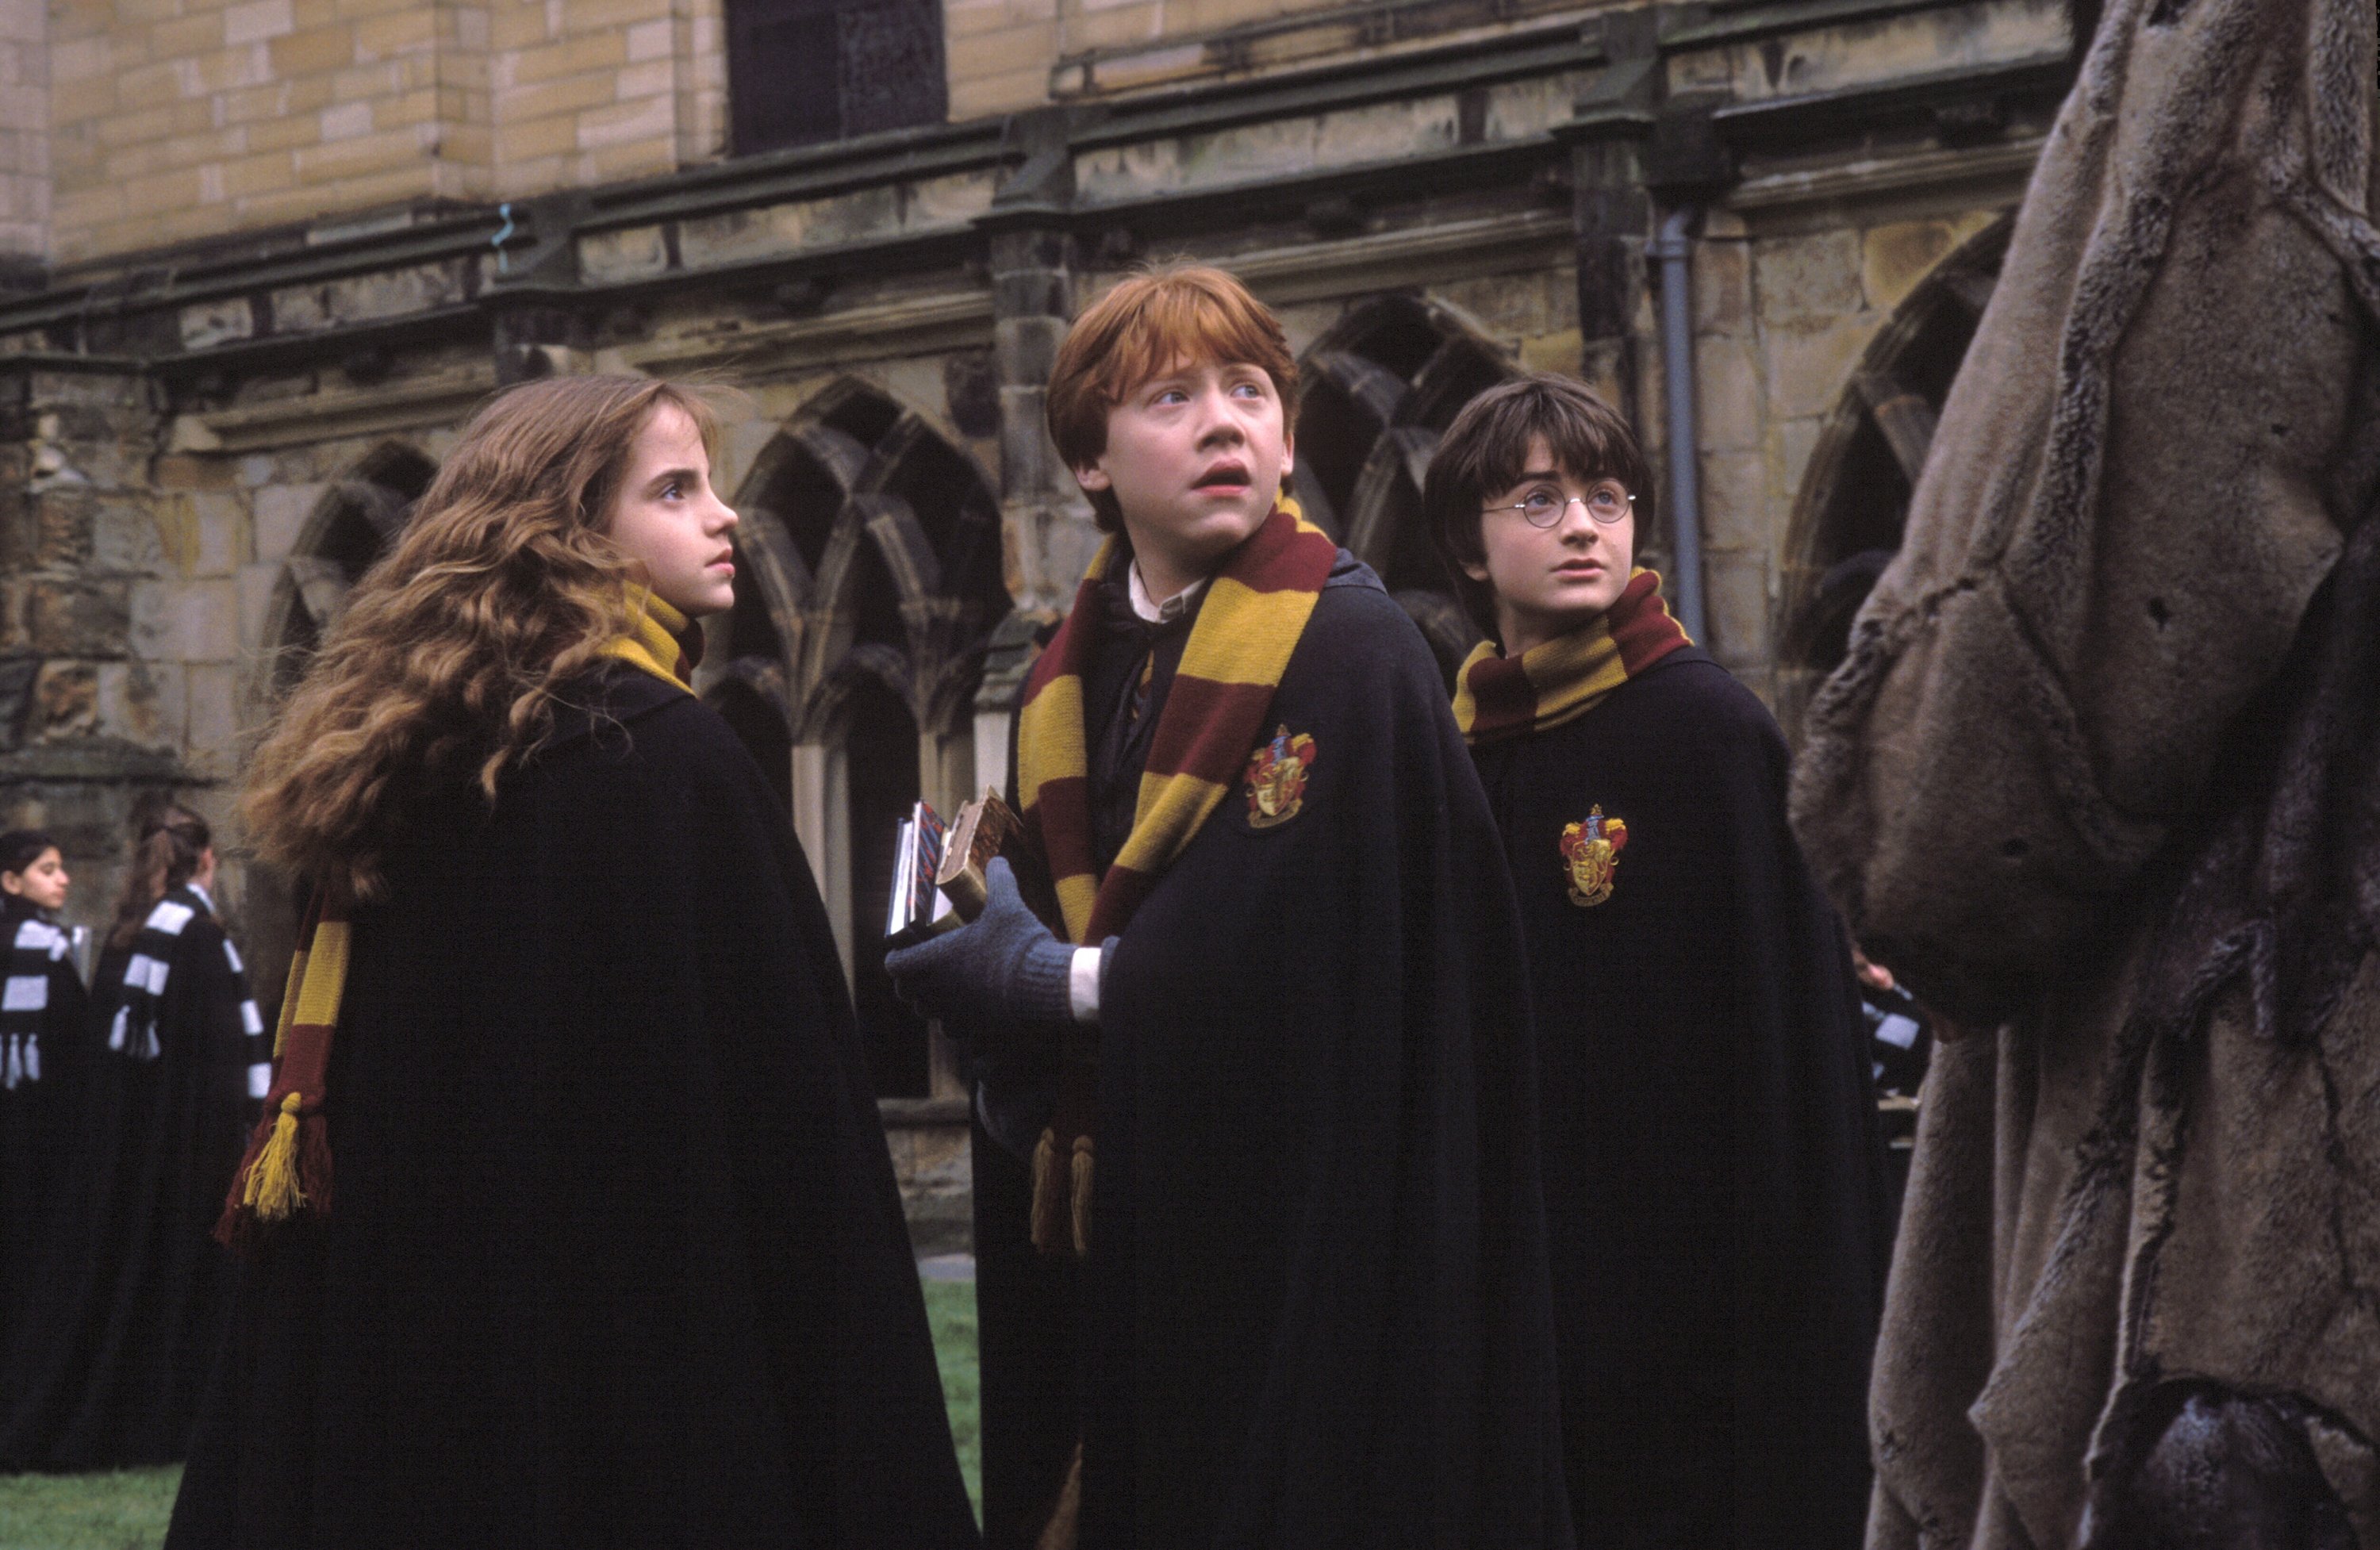 harry potter, hermione granger, harry potter and the chamber of secrets, movie, daniel radcliffe, emma watson, ron weasley, rupert grint